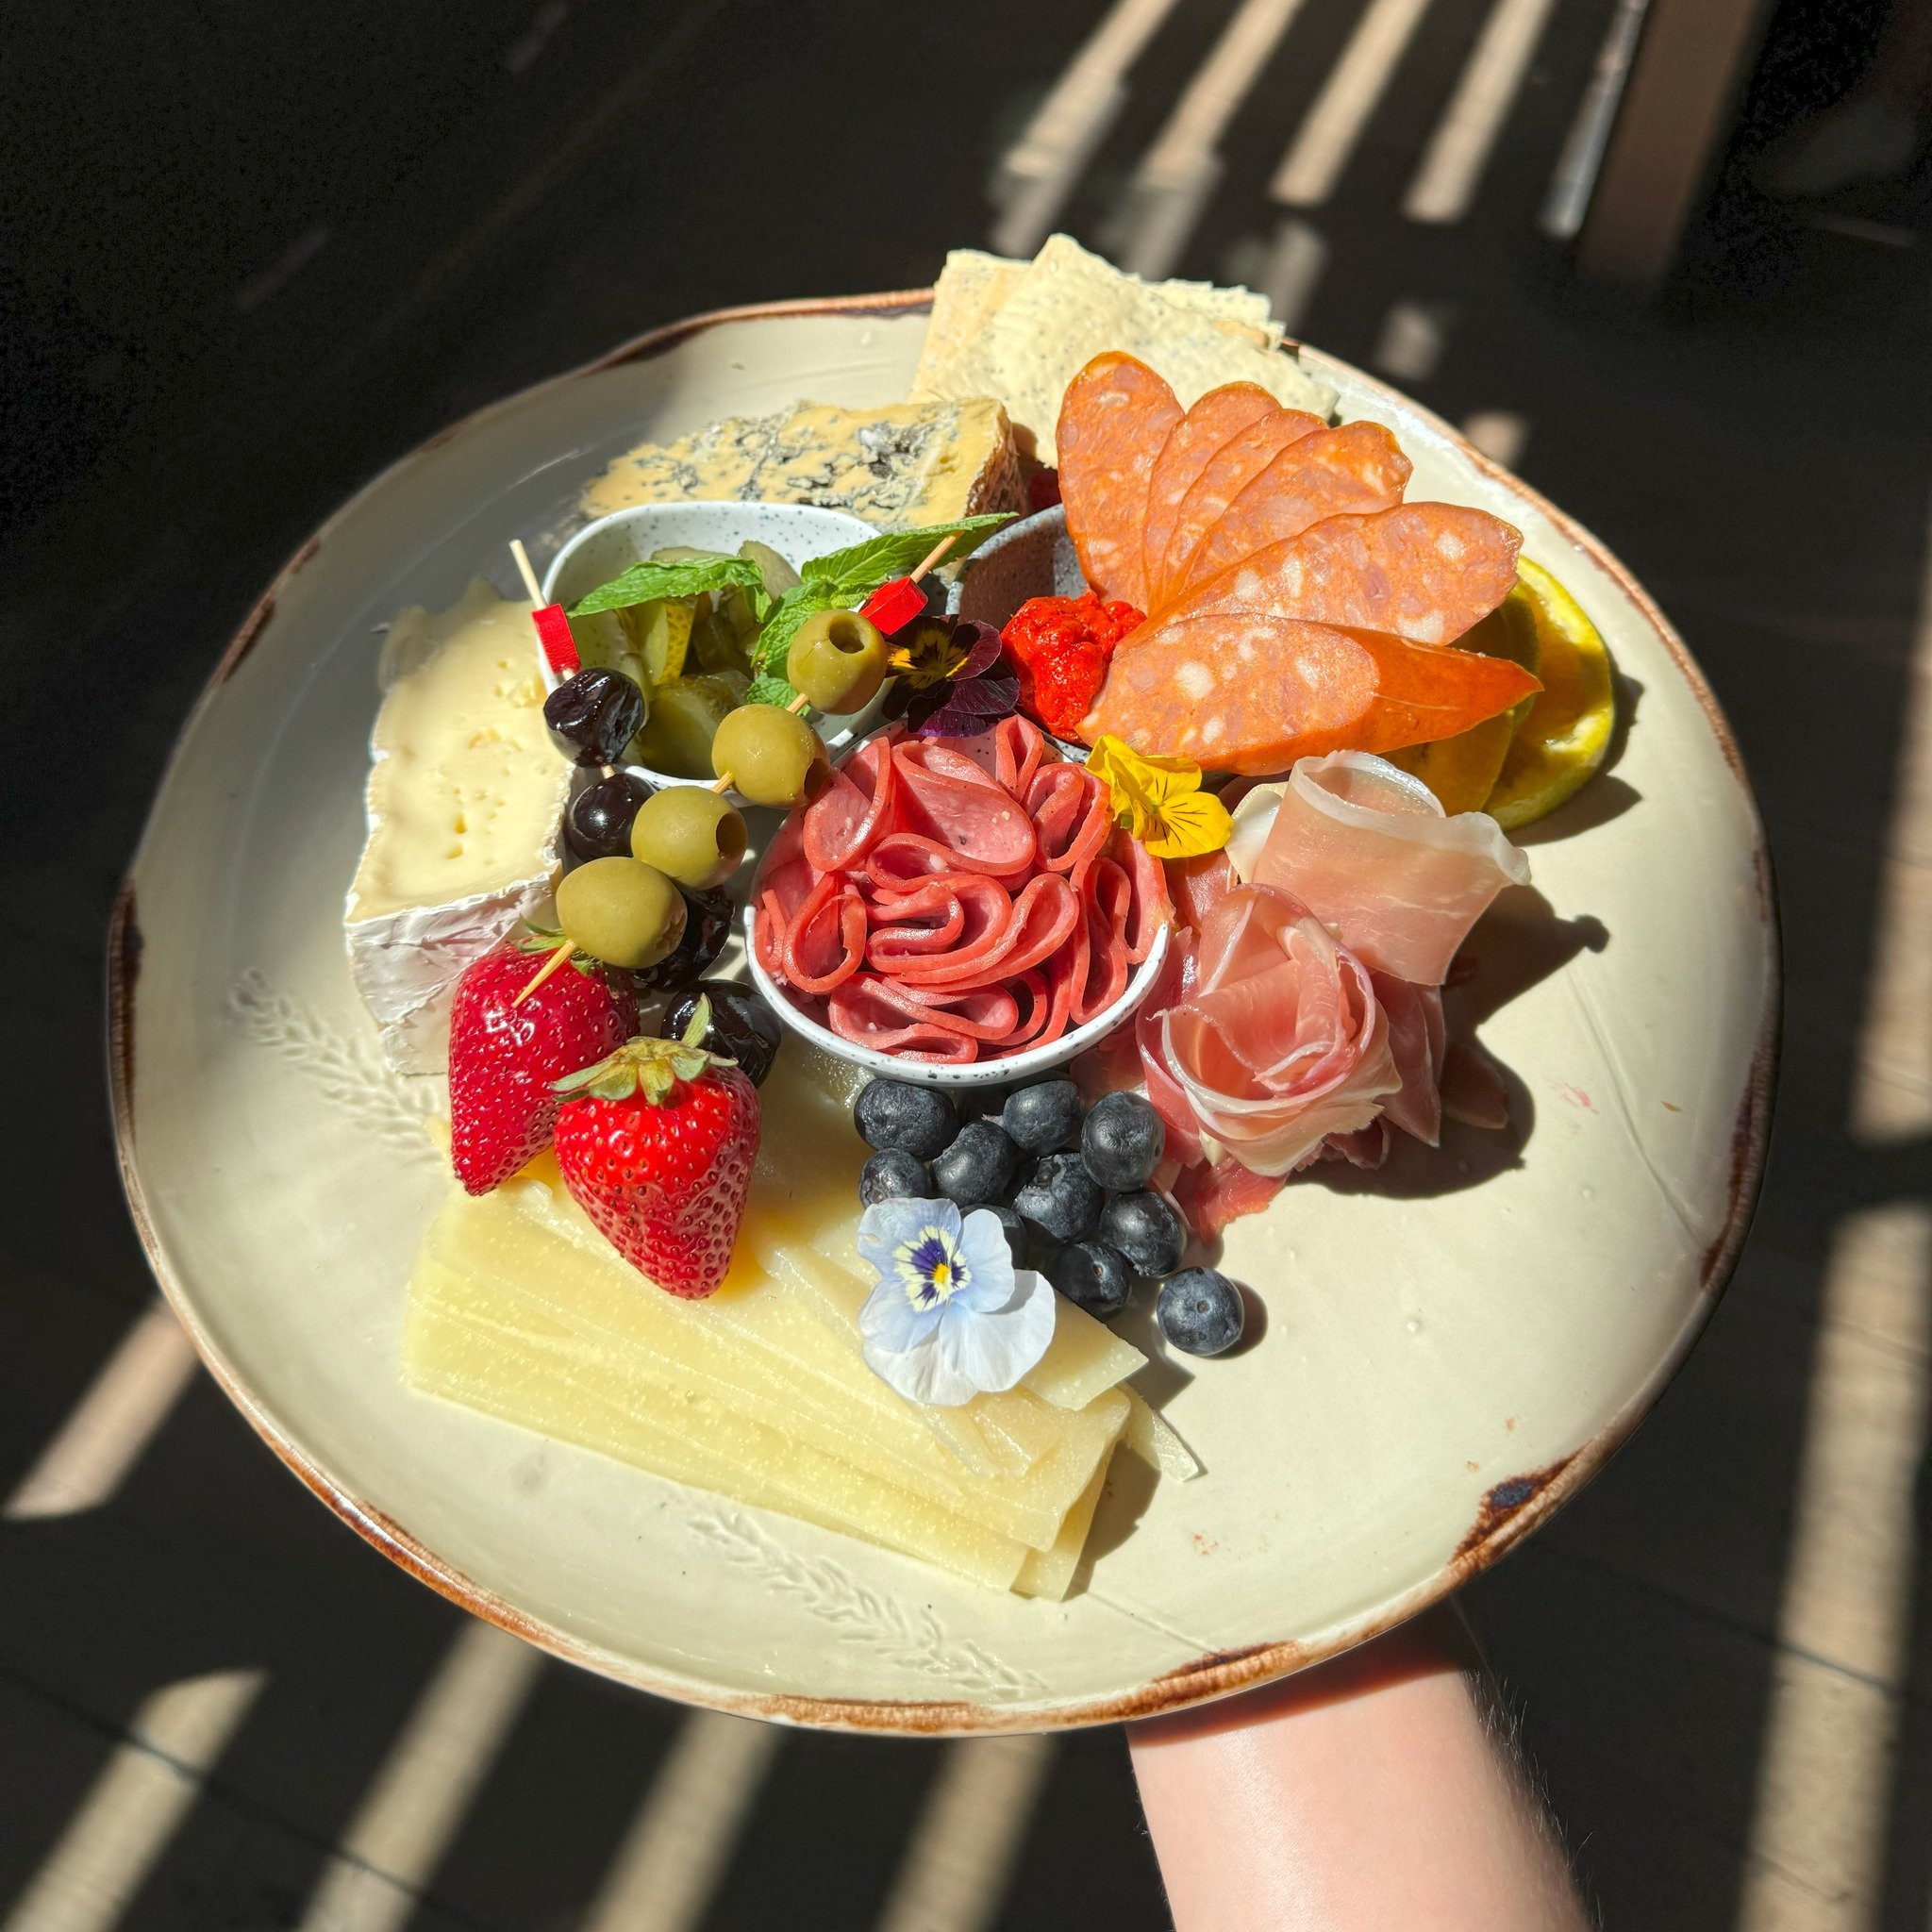 Treat your mum on Sunday with our great Mother's Day specials. Indulge in our $39 Charcuterie plate, perfect for sharing, and sweeten the celebration with a $10 Black Forest Slice. 🧀🍰

Plus we have $12 Mum-osas, a refreshing blend of orange sorbet 